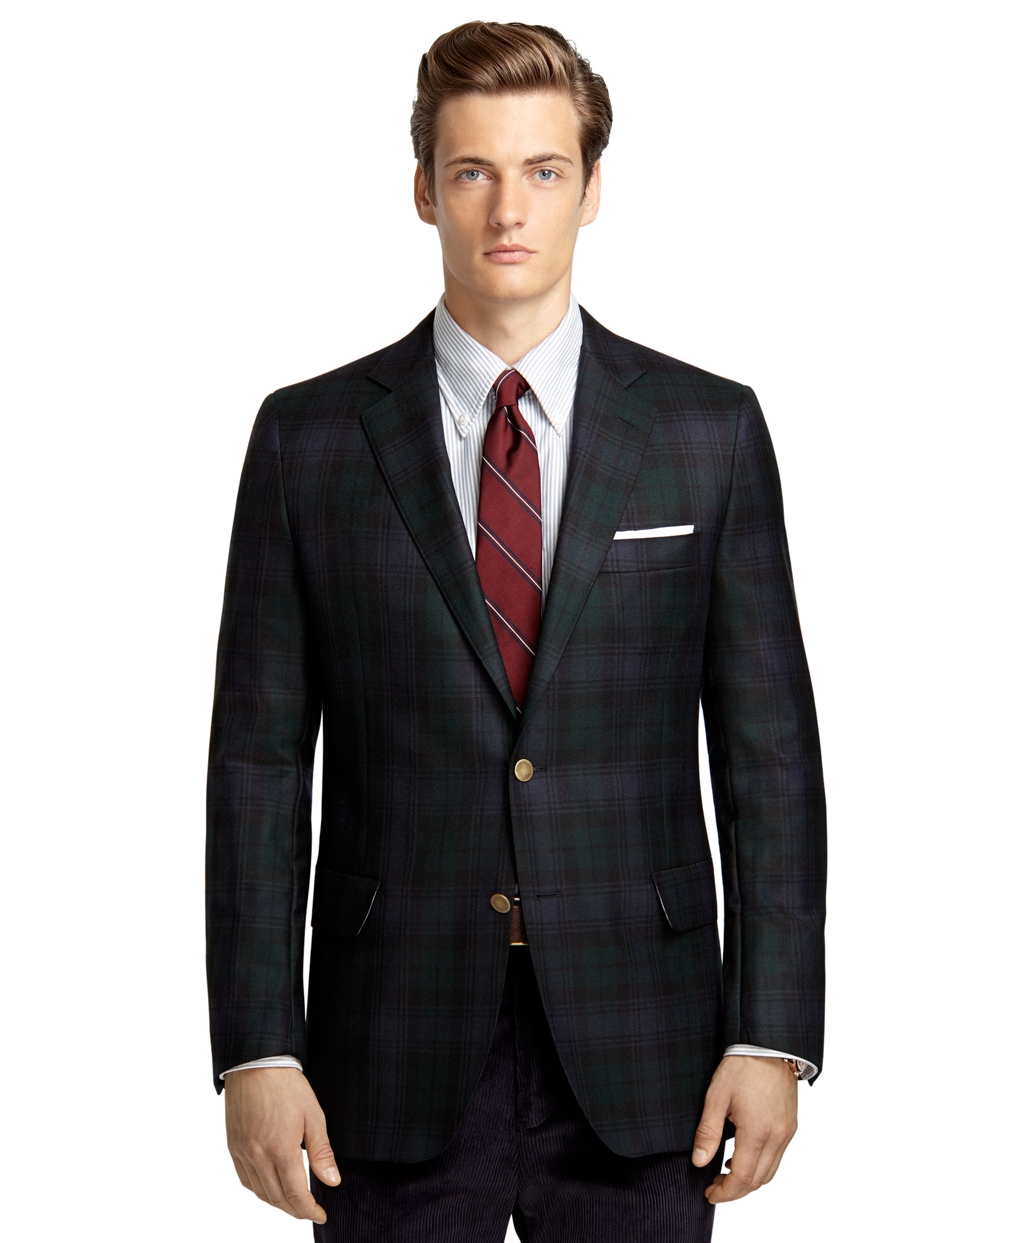 Lyst - Brooks Brothers Own Make Blackwatch Plaid 102 Sport Coat in Blue ...